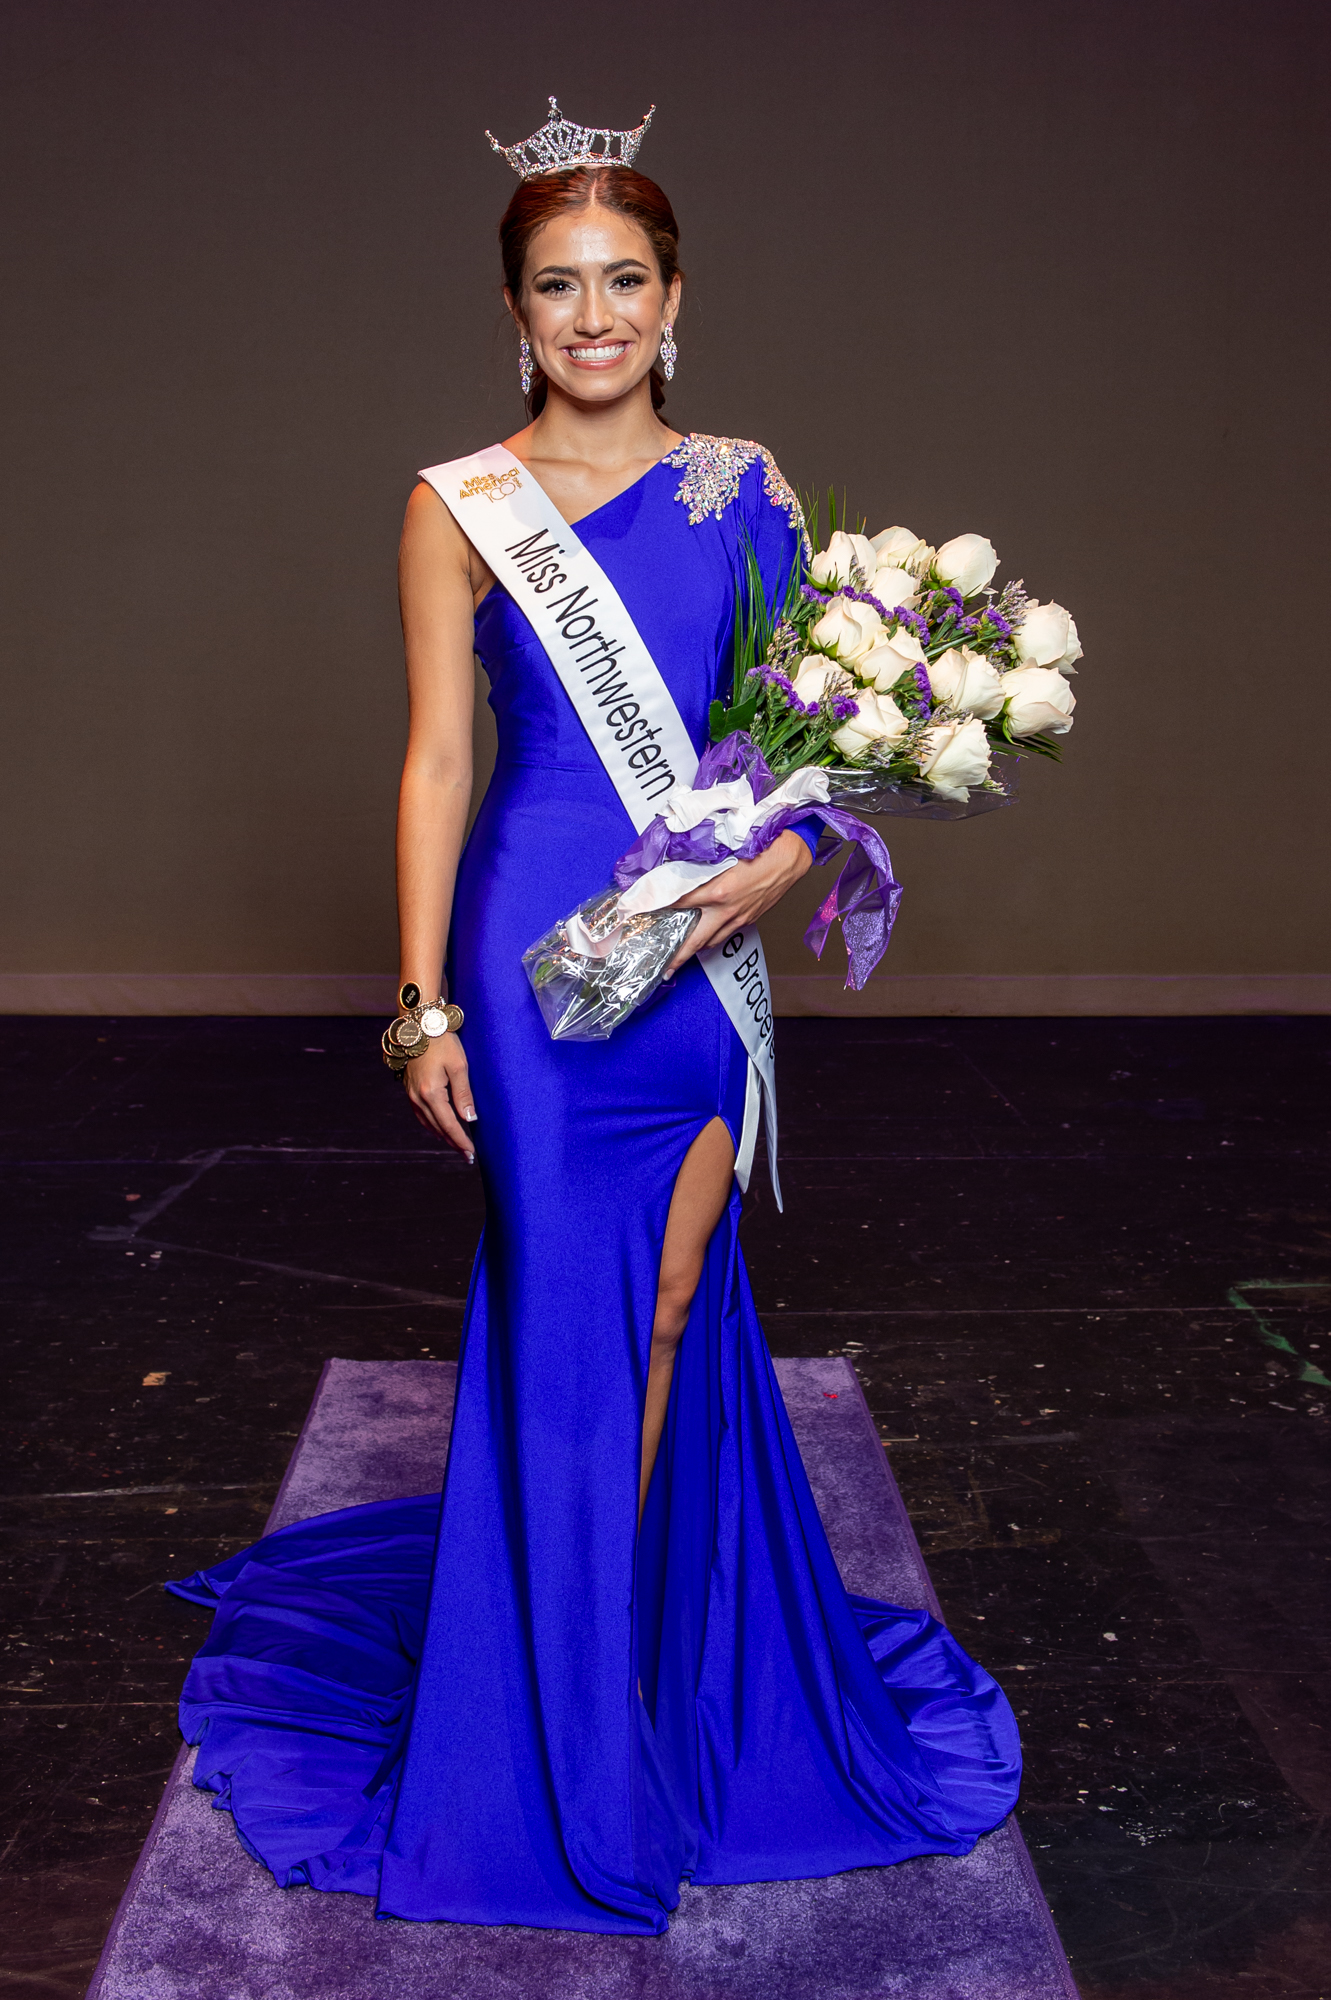 Miss Natchitoches City of Lights Makenzie Scroggs is Miss Louisiana